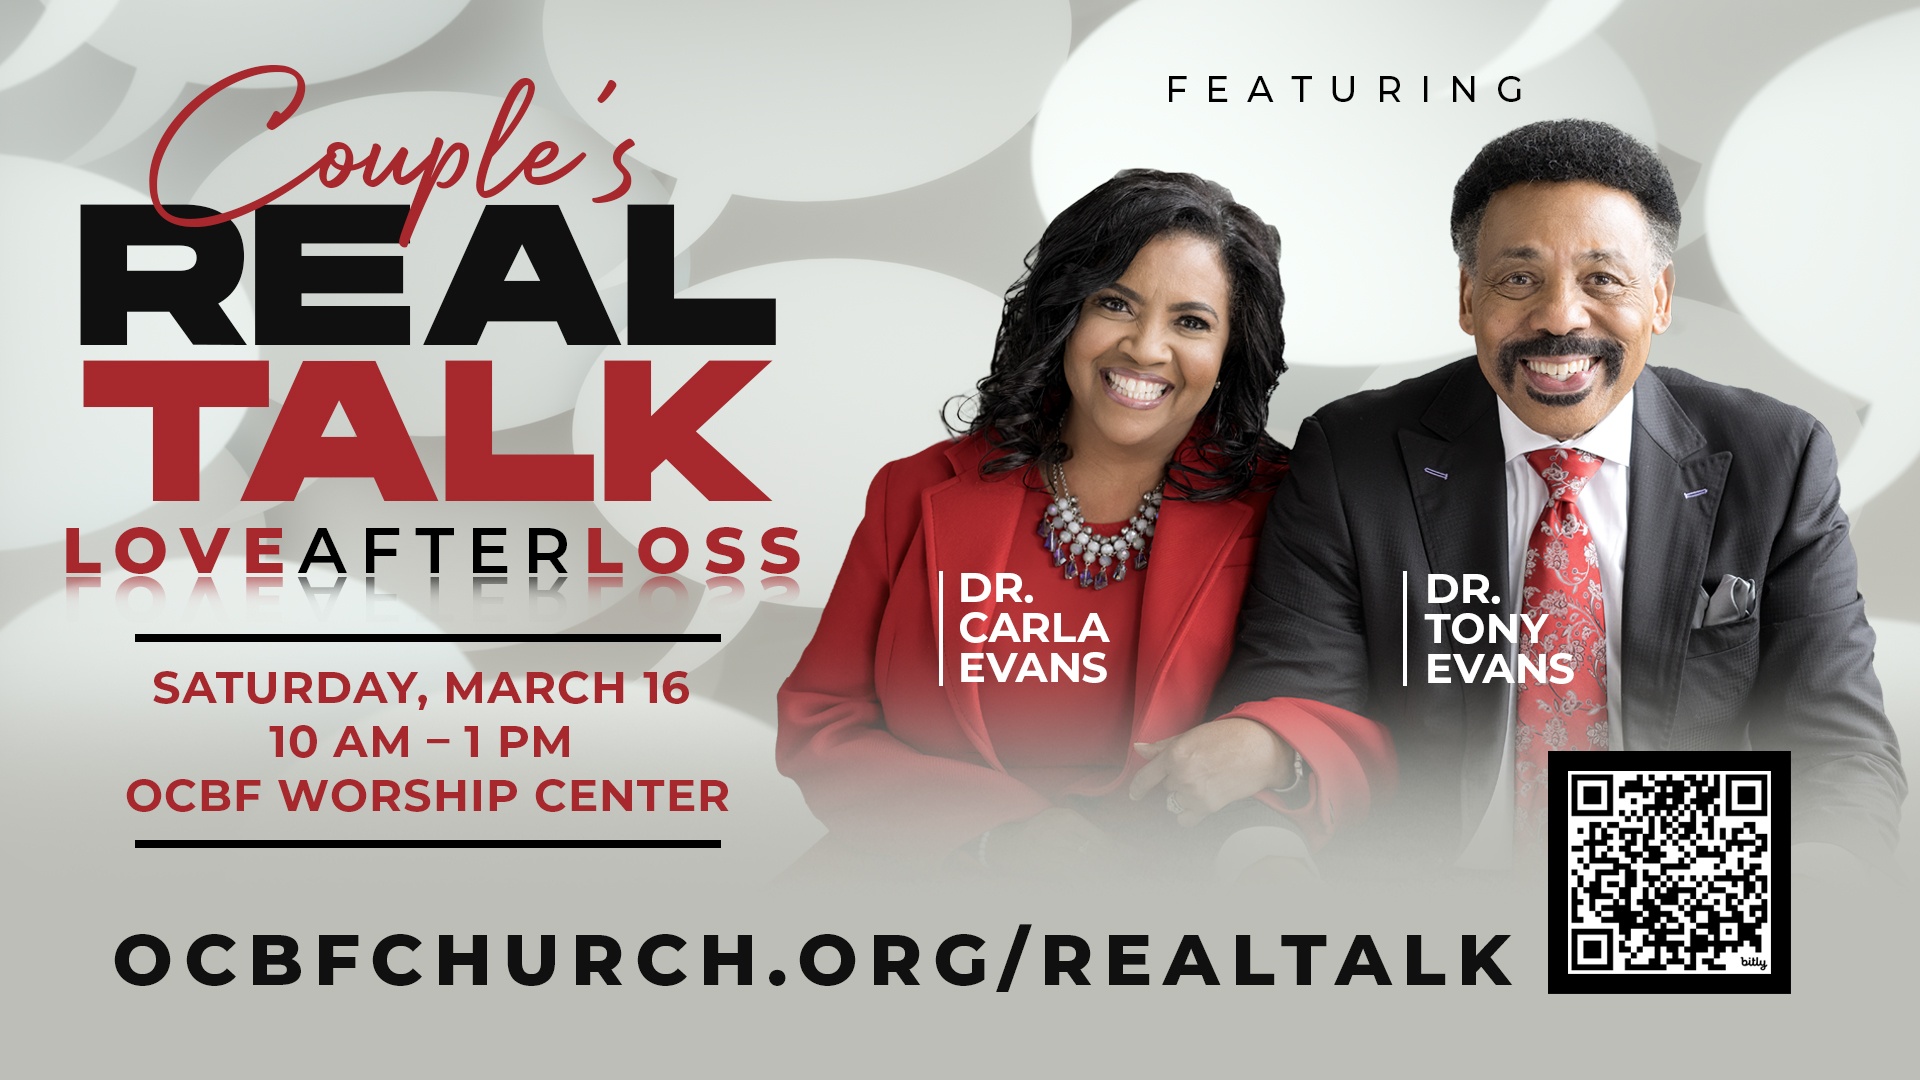 Tony Evans and Carla Evans at Couples Real Talk on Love after Loss at Oak Cliff Bible Fellowship